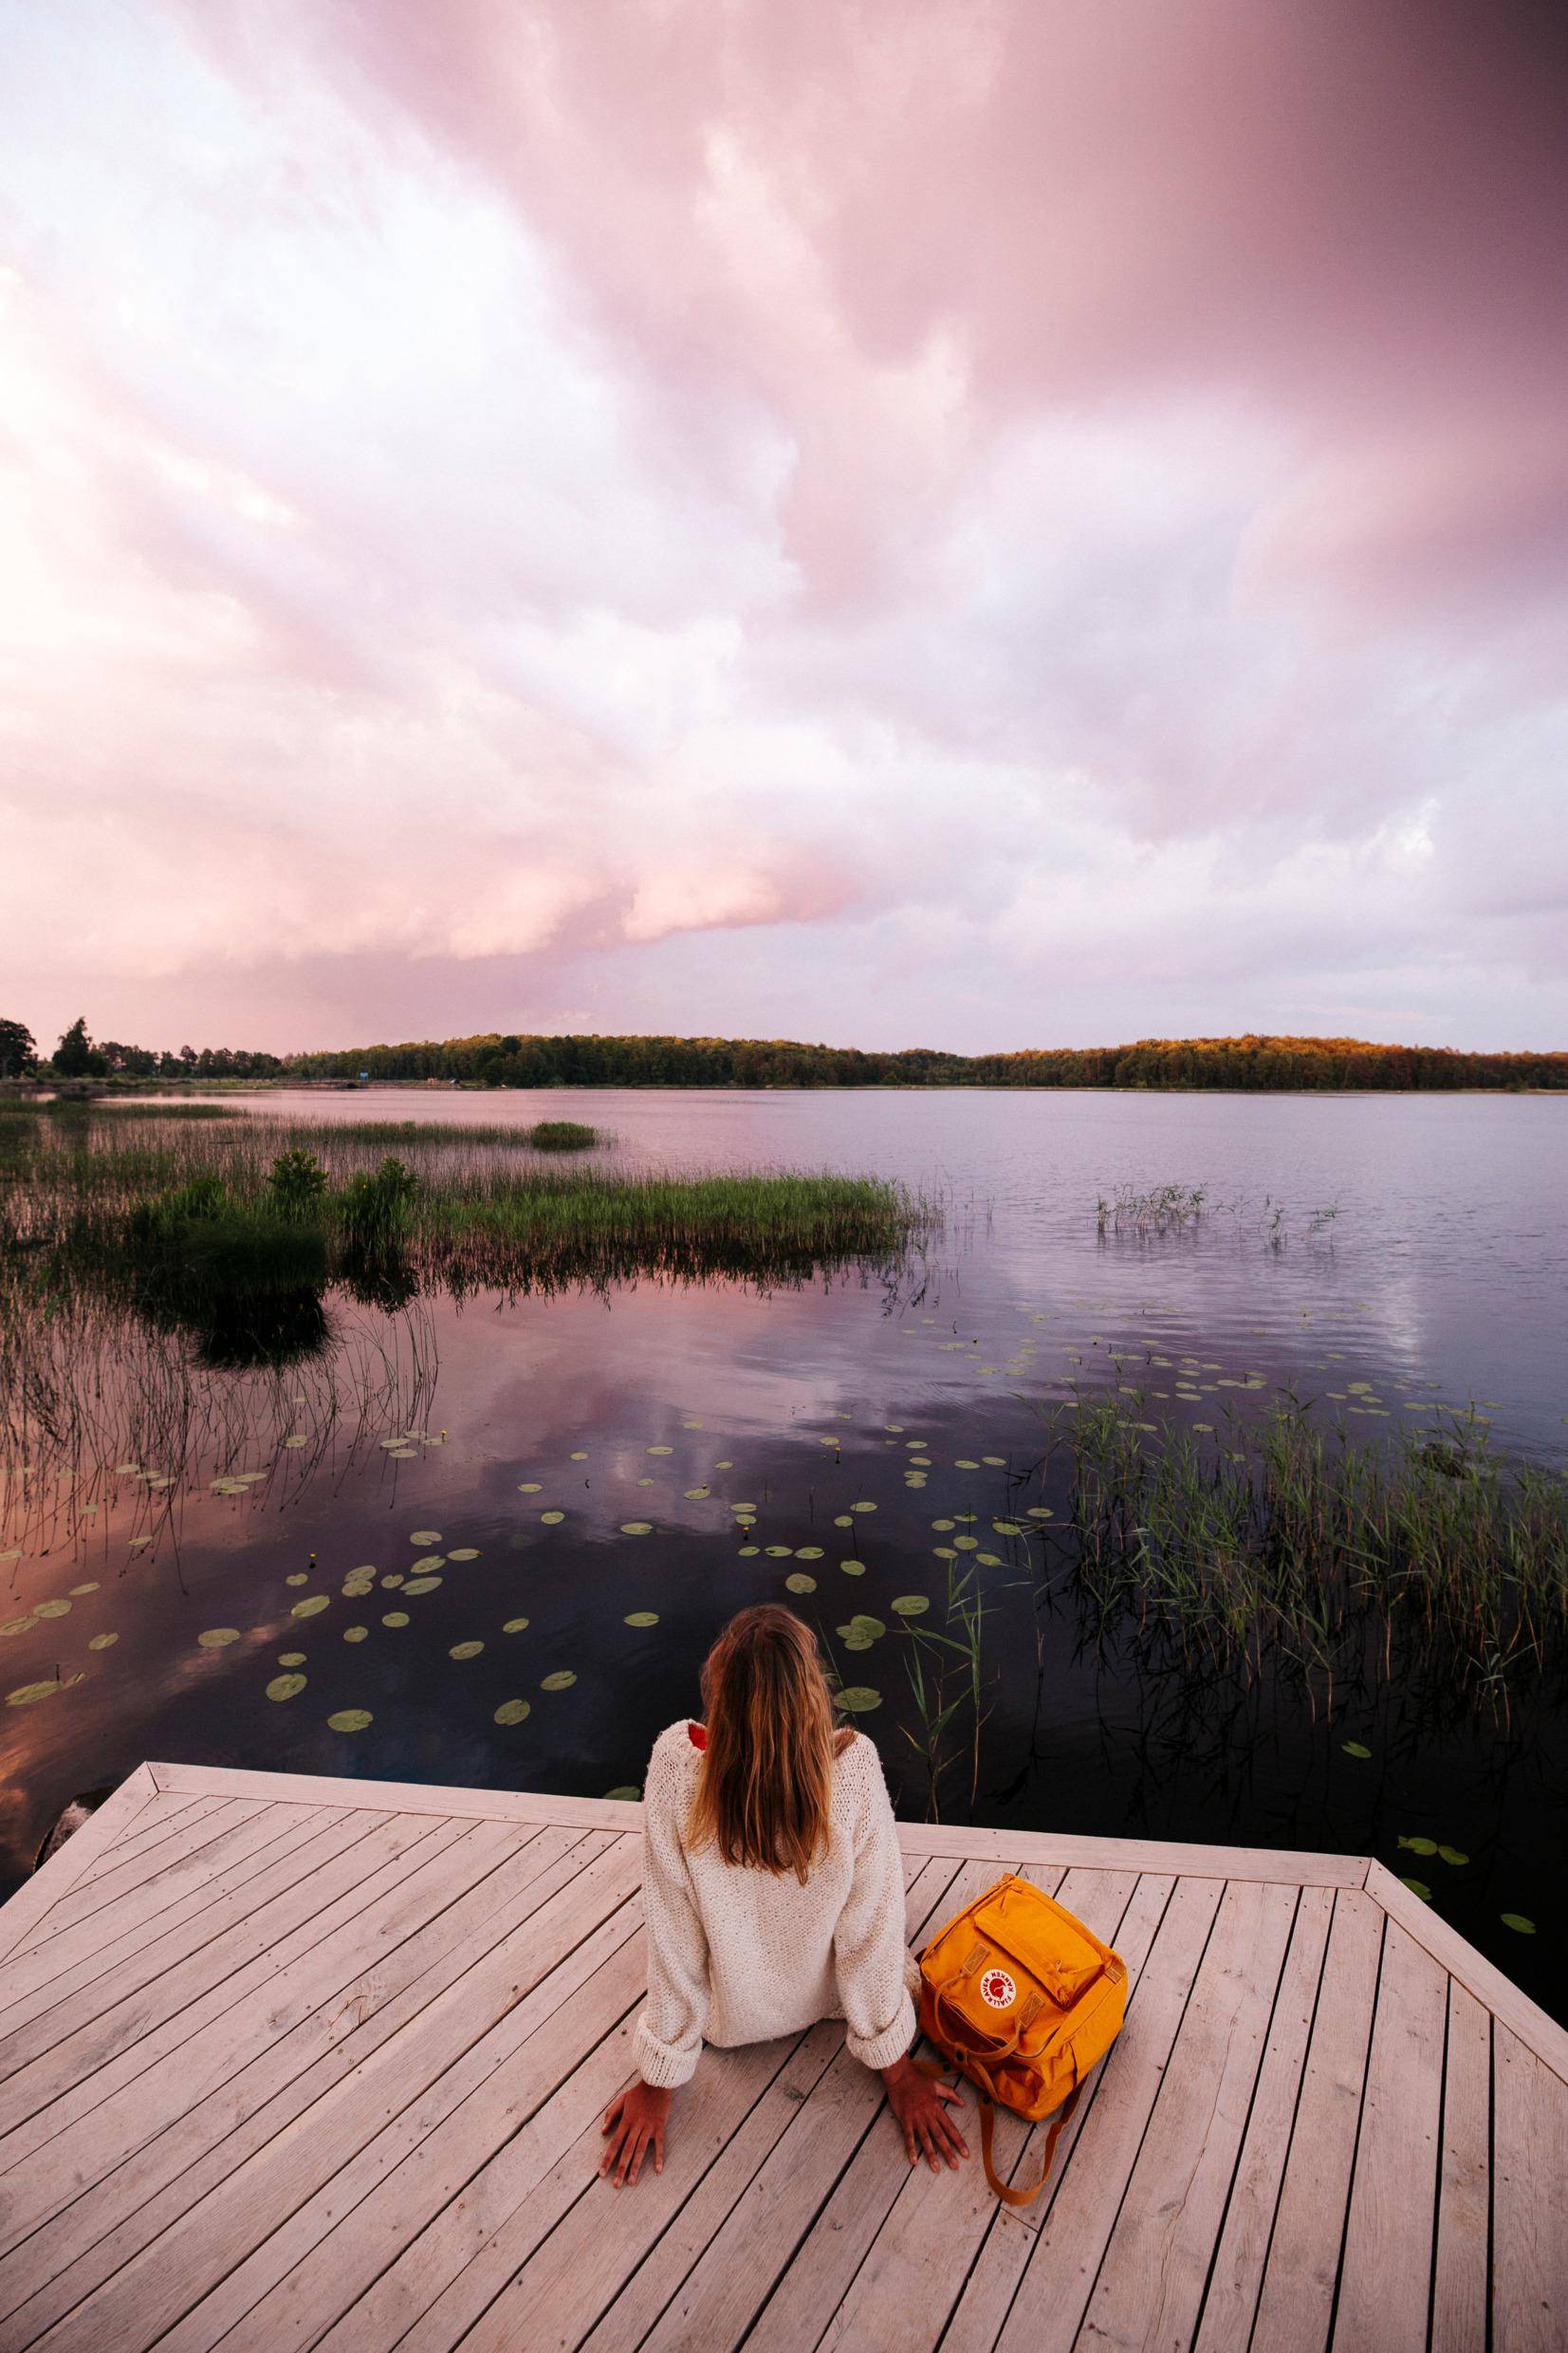 A woman sitting back on a boardwalk by a lake, looking out over a lake which is surrounded by greenery.